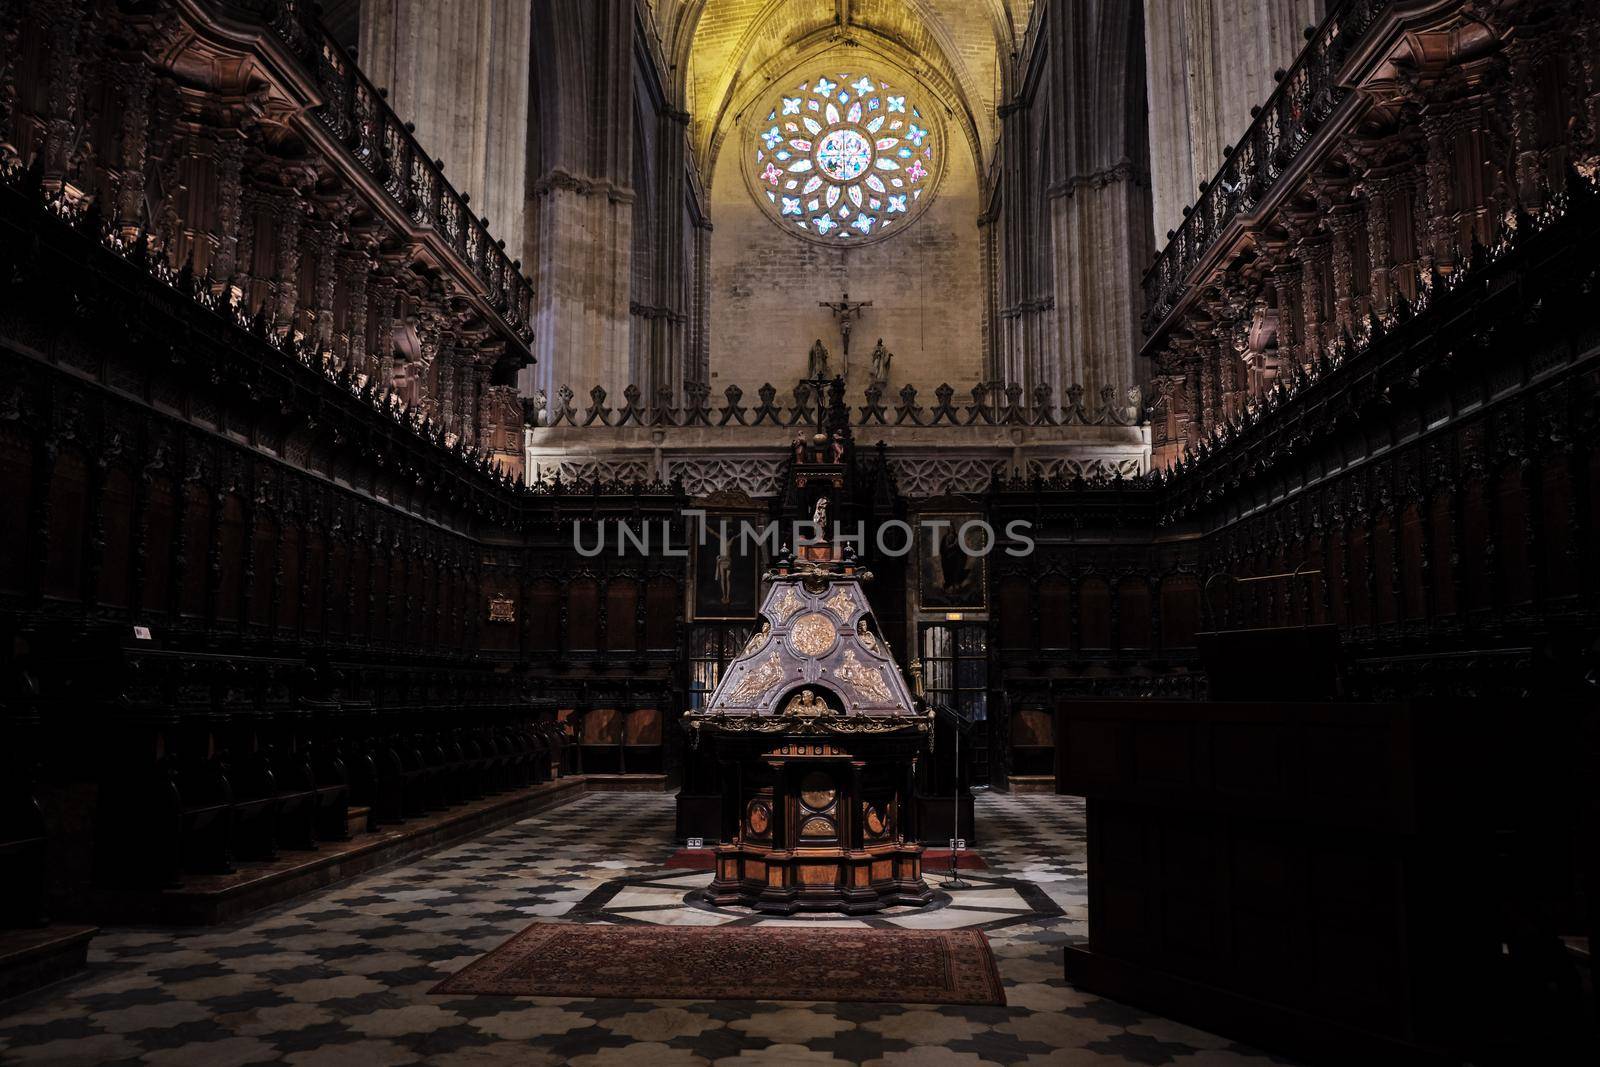 April 2019 - Interior view of the Cathedral of Saint Mary of the See (Seville Cathedral) in Seville, Andalusia, Spain